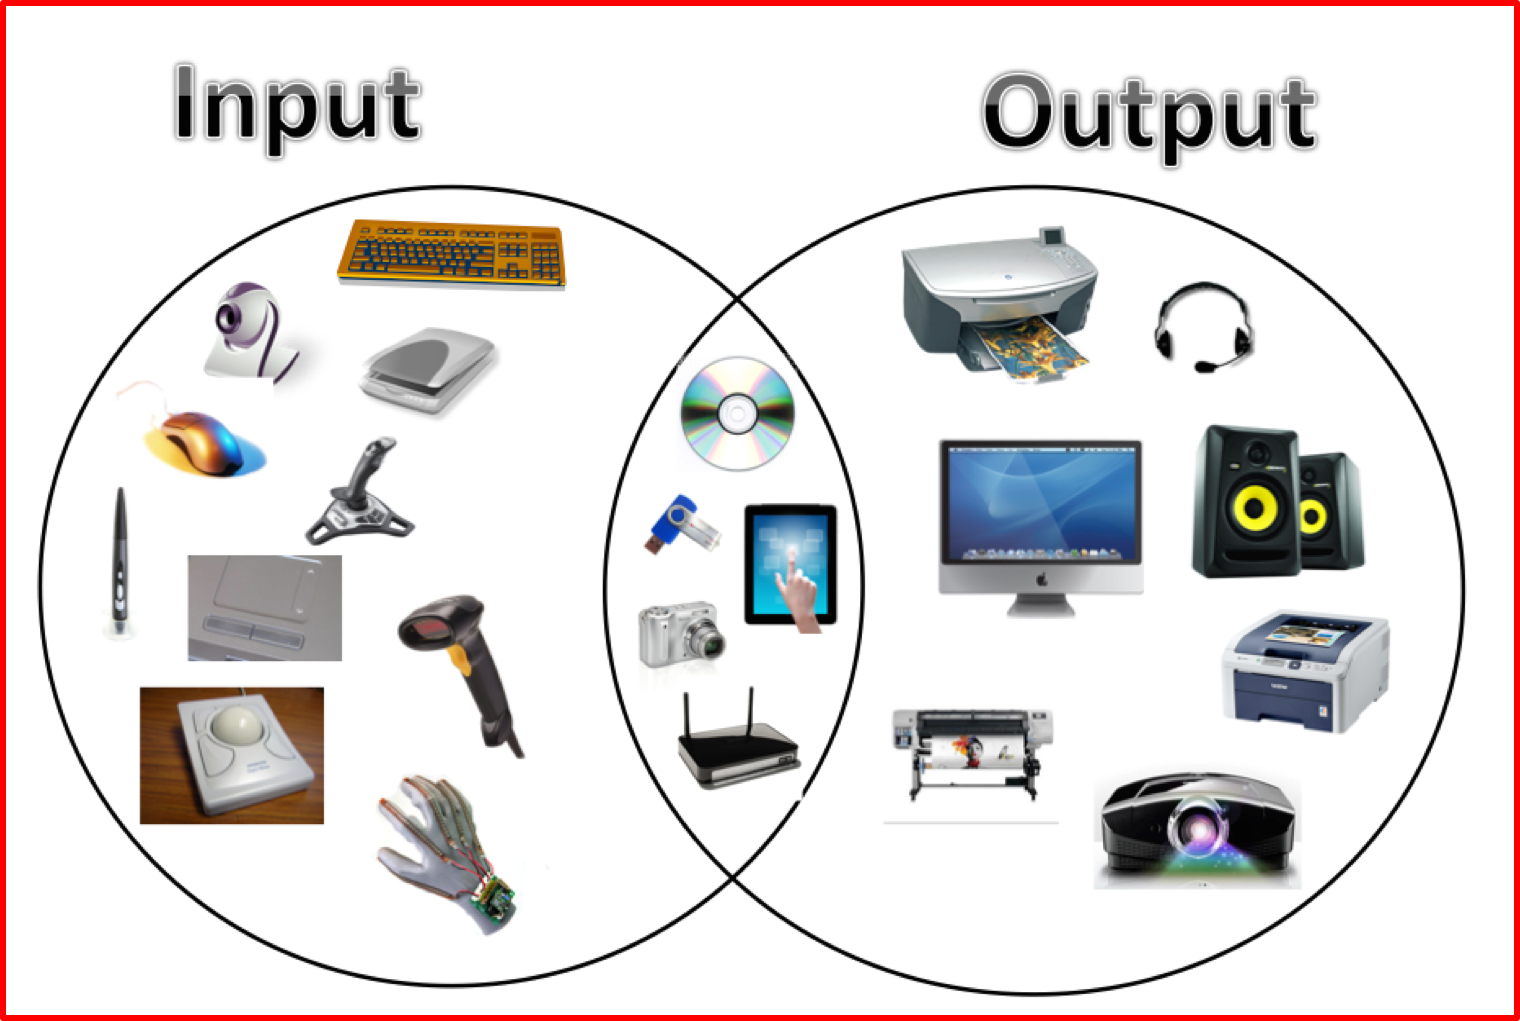 Input output. Input and output devices. Input and output devices of Computer. Устройства ввода и вывода.